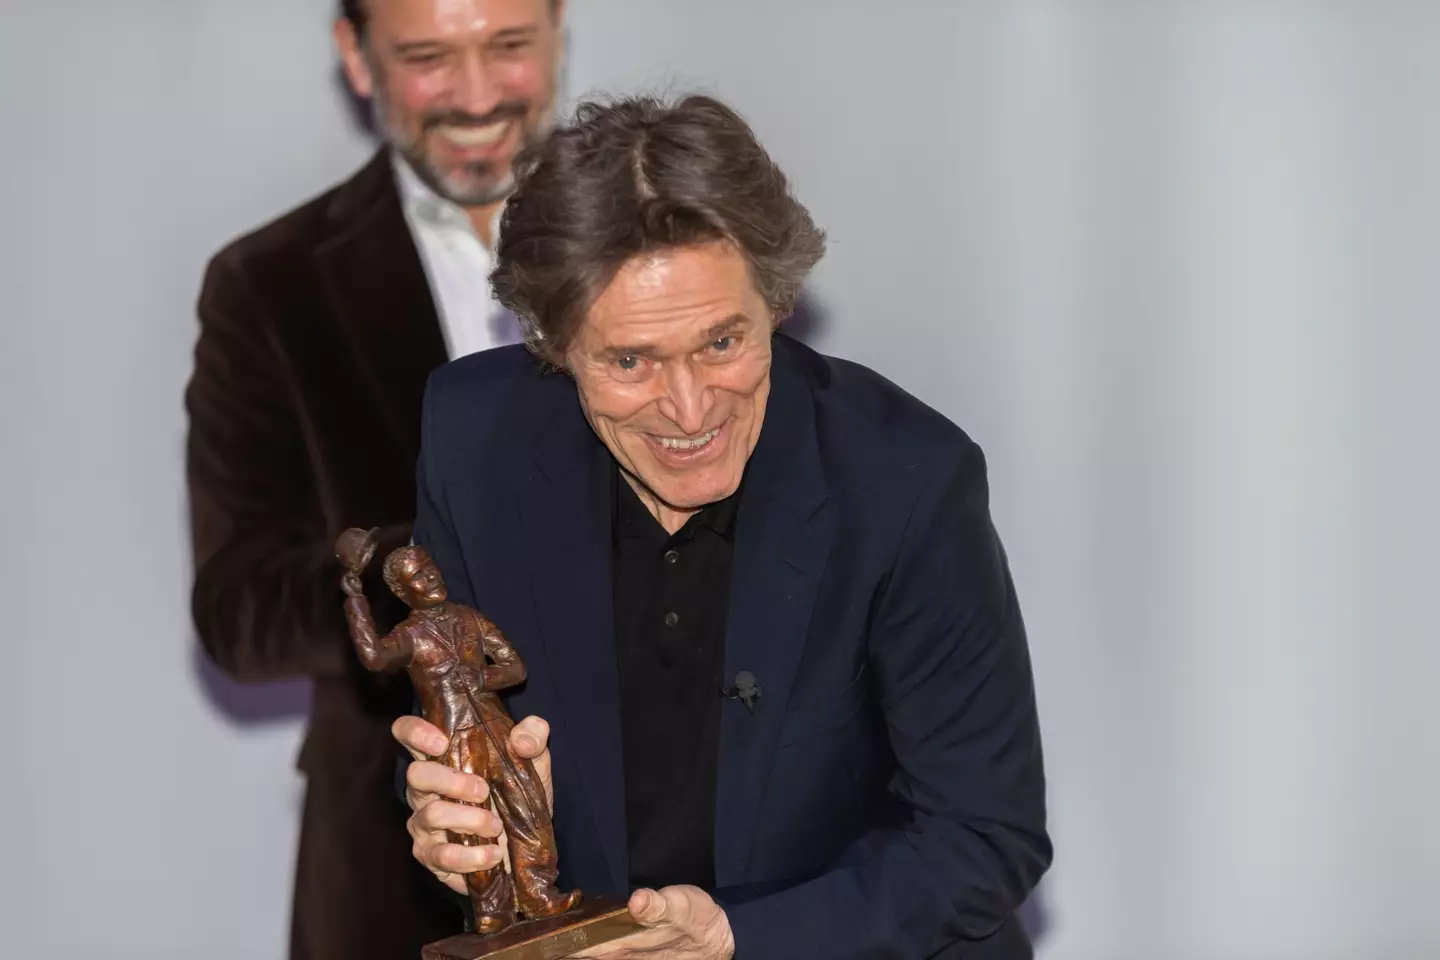 Dafoe has picked up four Oscar nominations in his career but no wins.